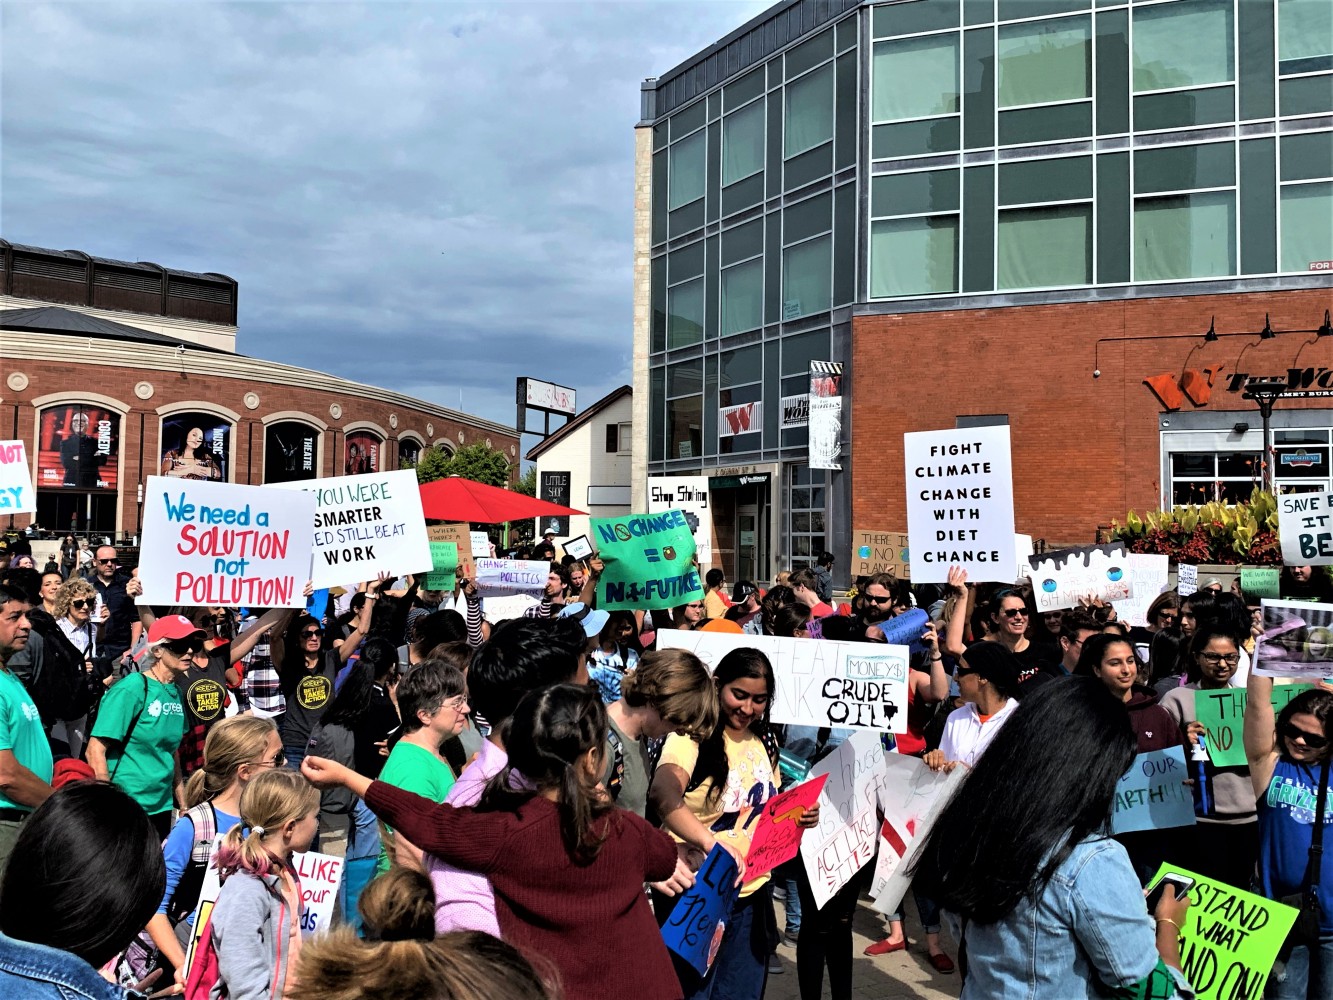 As Brampton’s youth climate activists descended on Garden Square one incumbent promised more